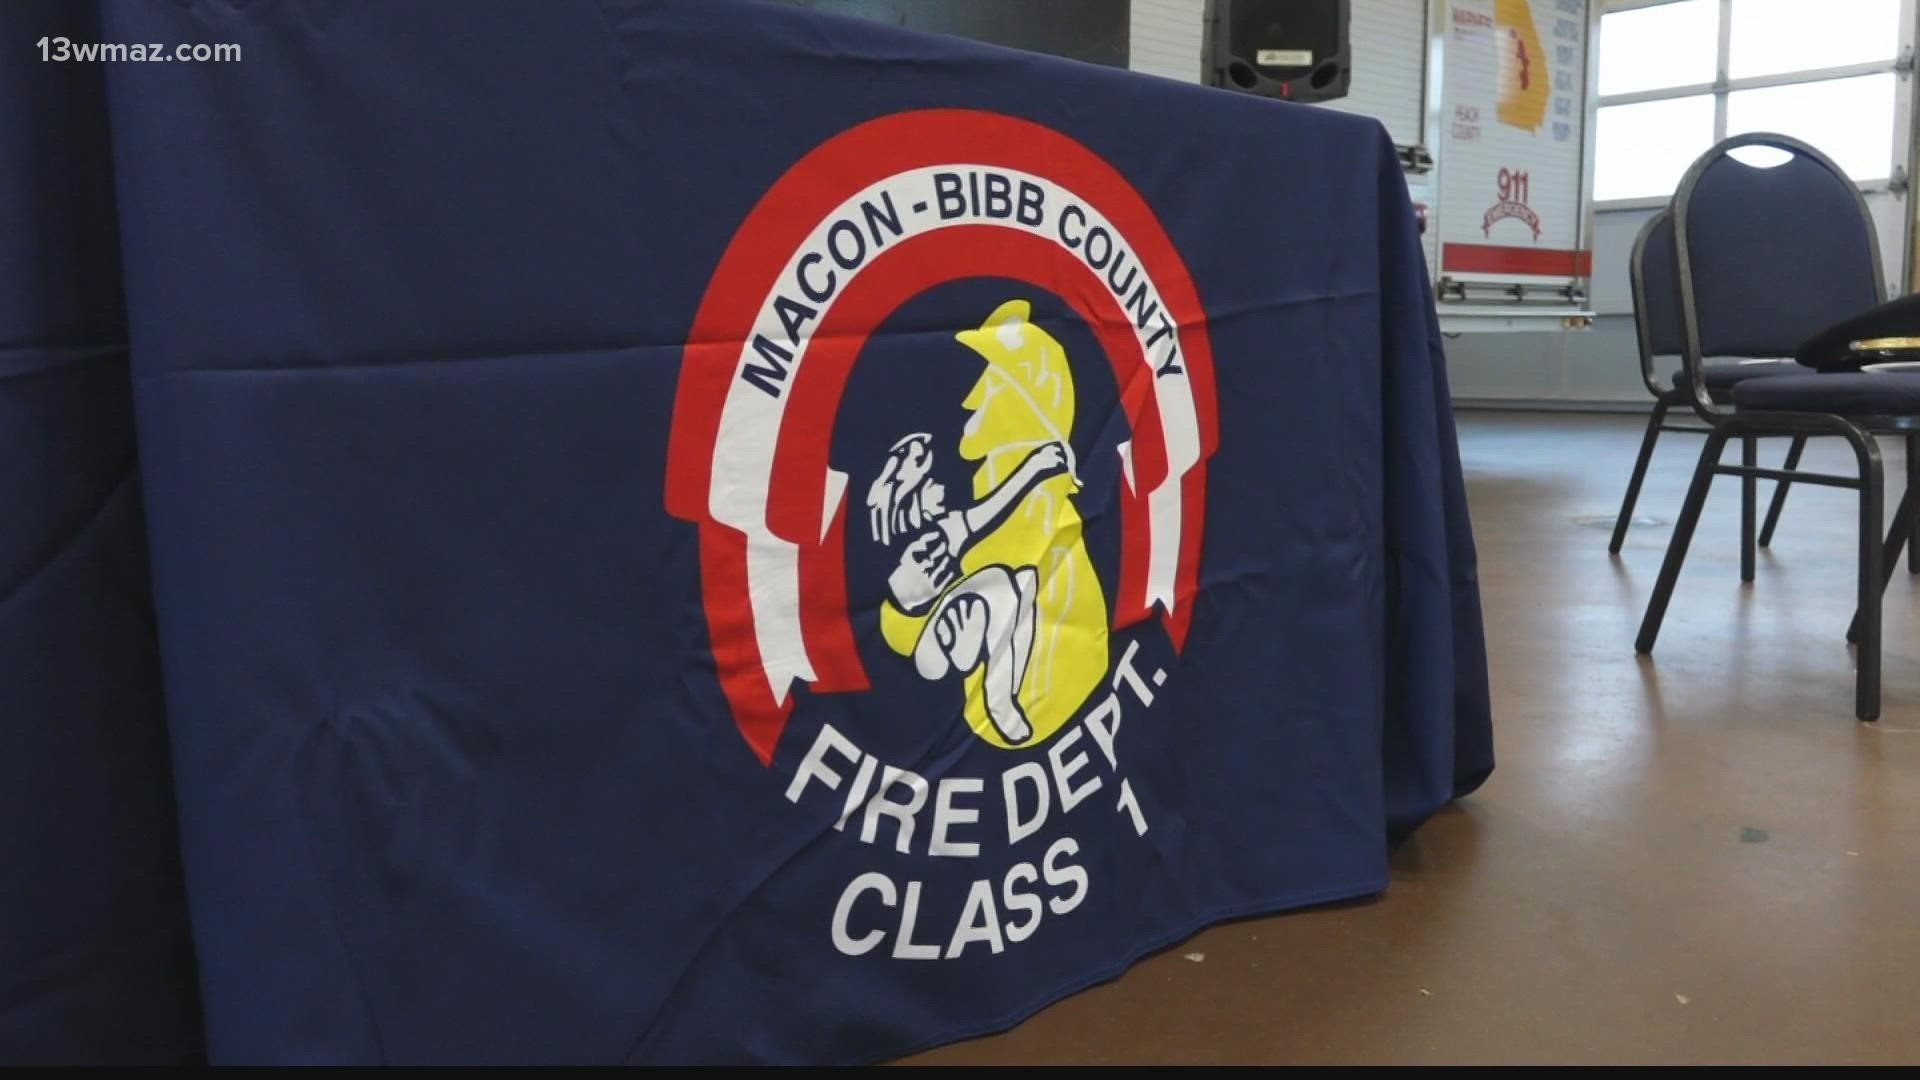 Some Bibb County Students were awarded scholarships and medals for their essays and posters on fire safety.